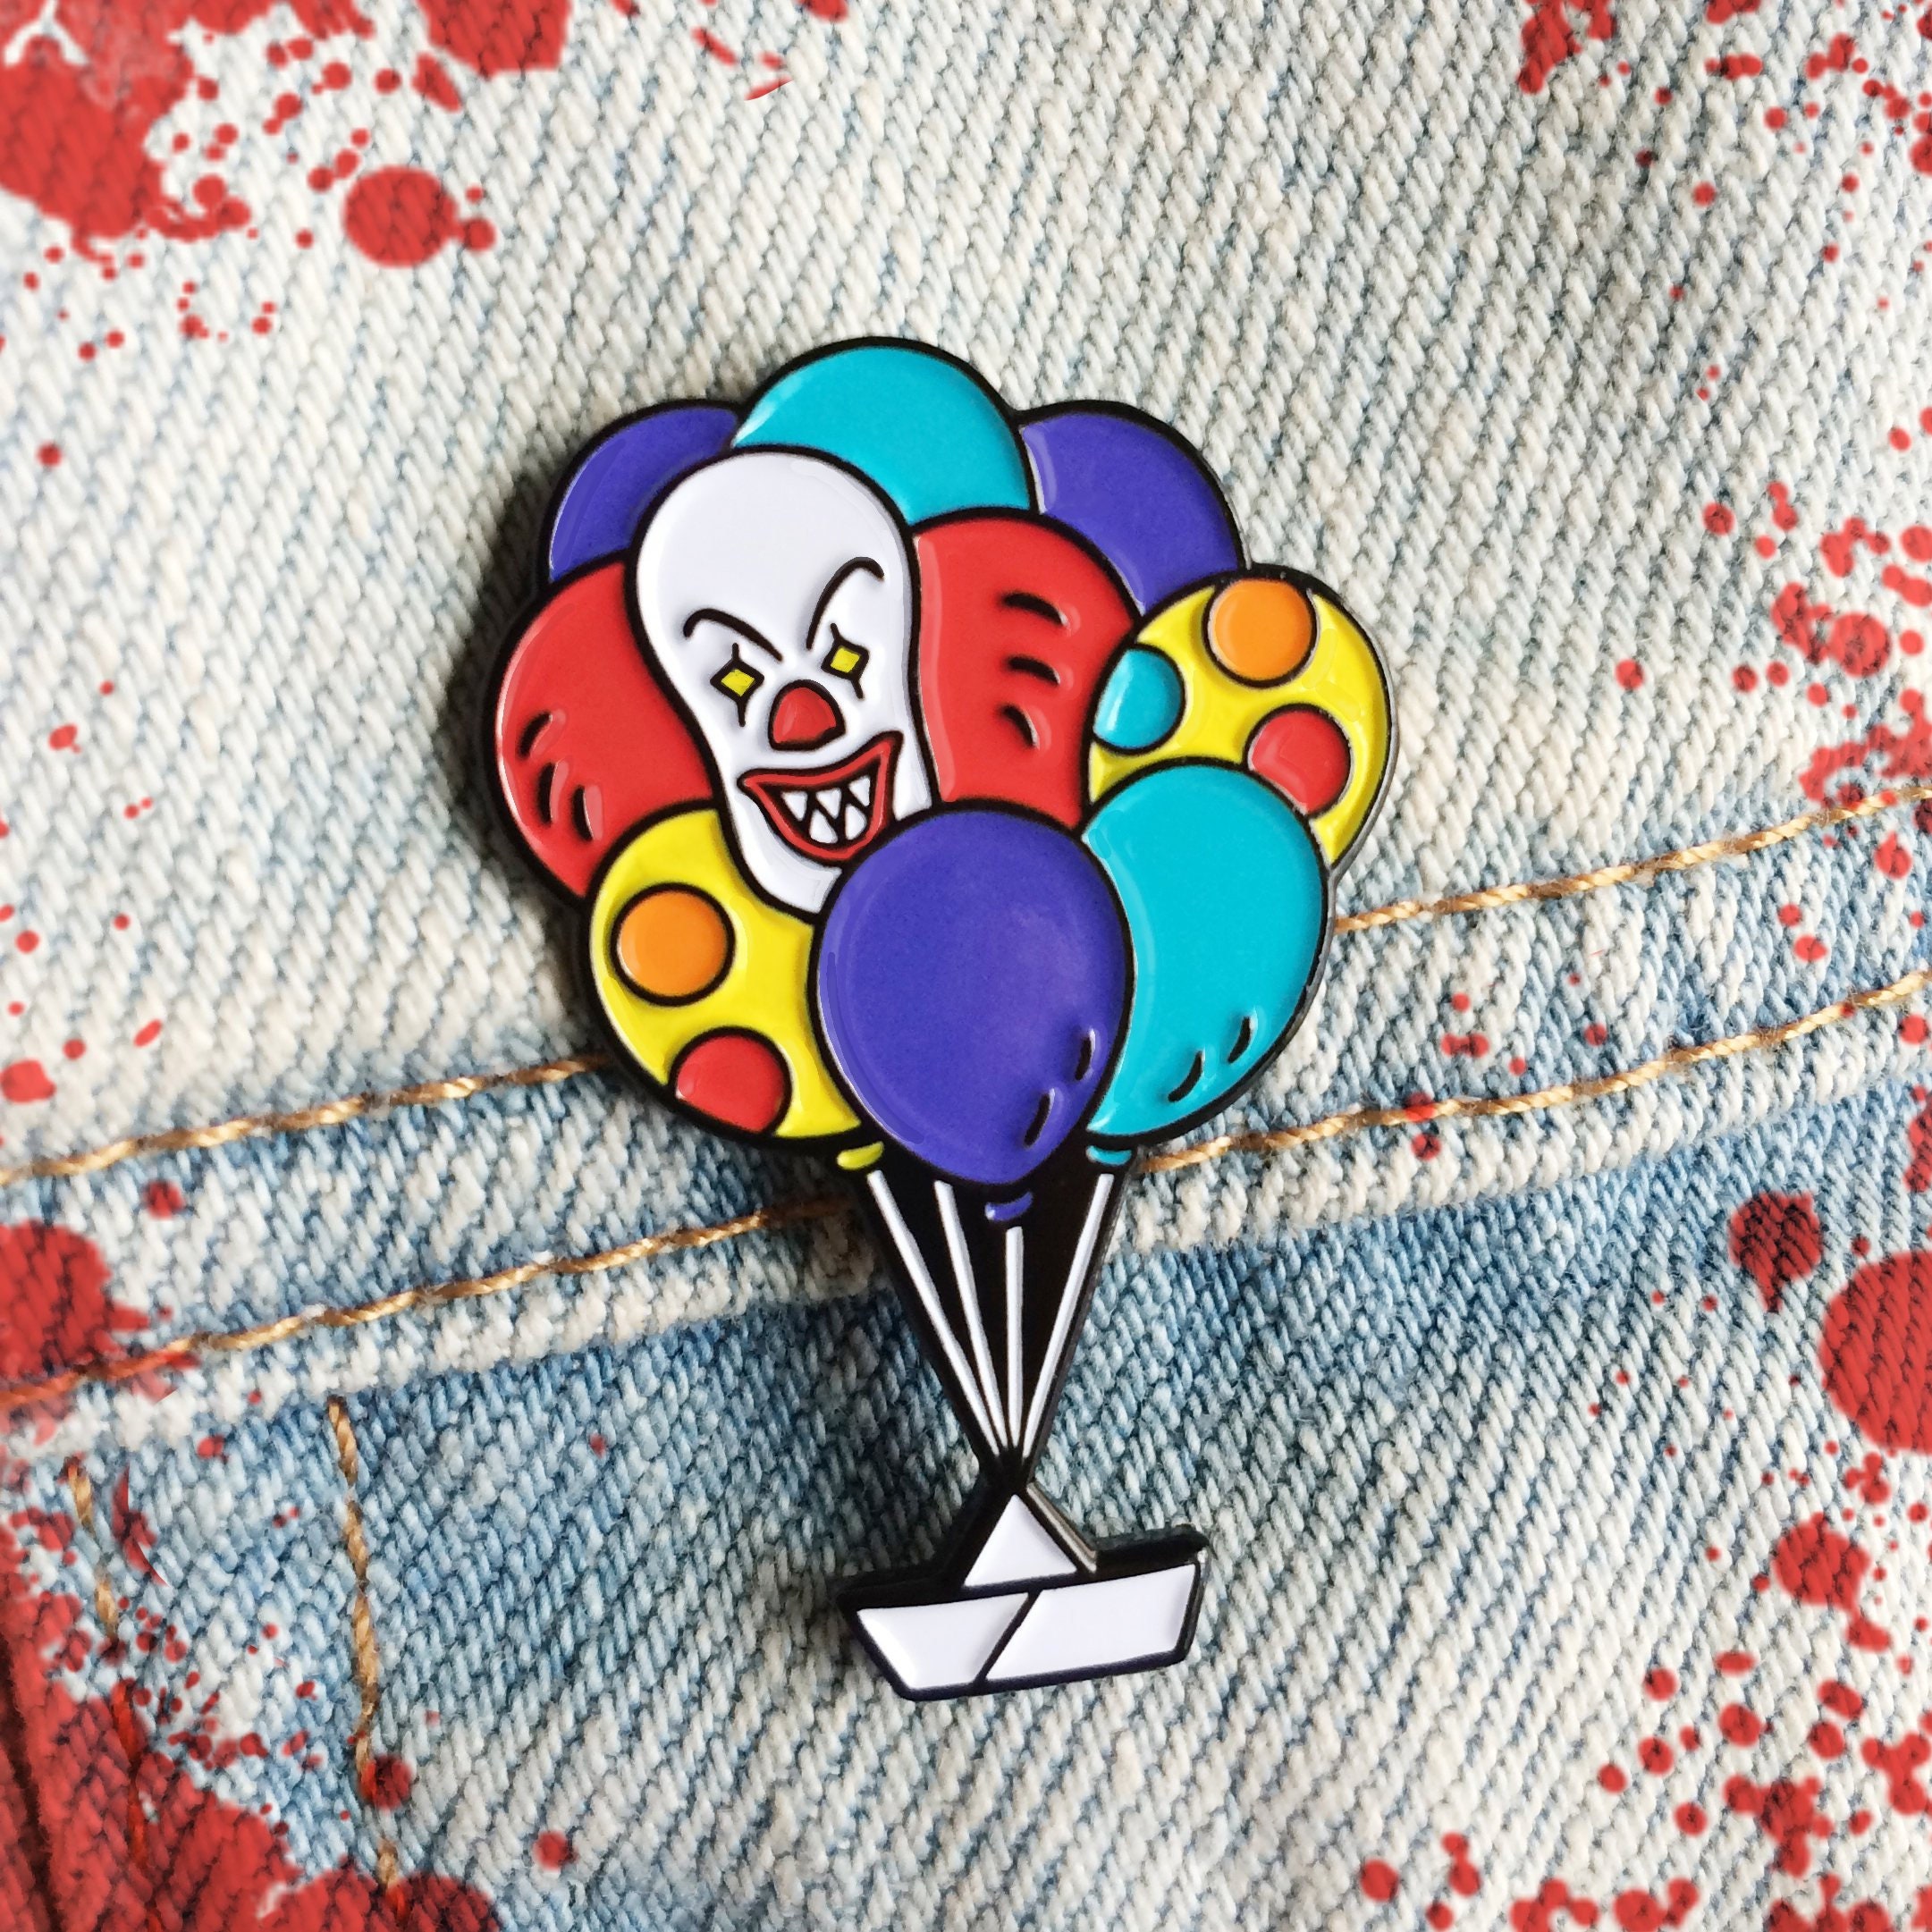 OPFunnyPins One Piece Pin Fu Strawhat Buggy The Clown Inspired Enamel